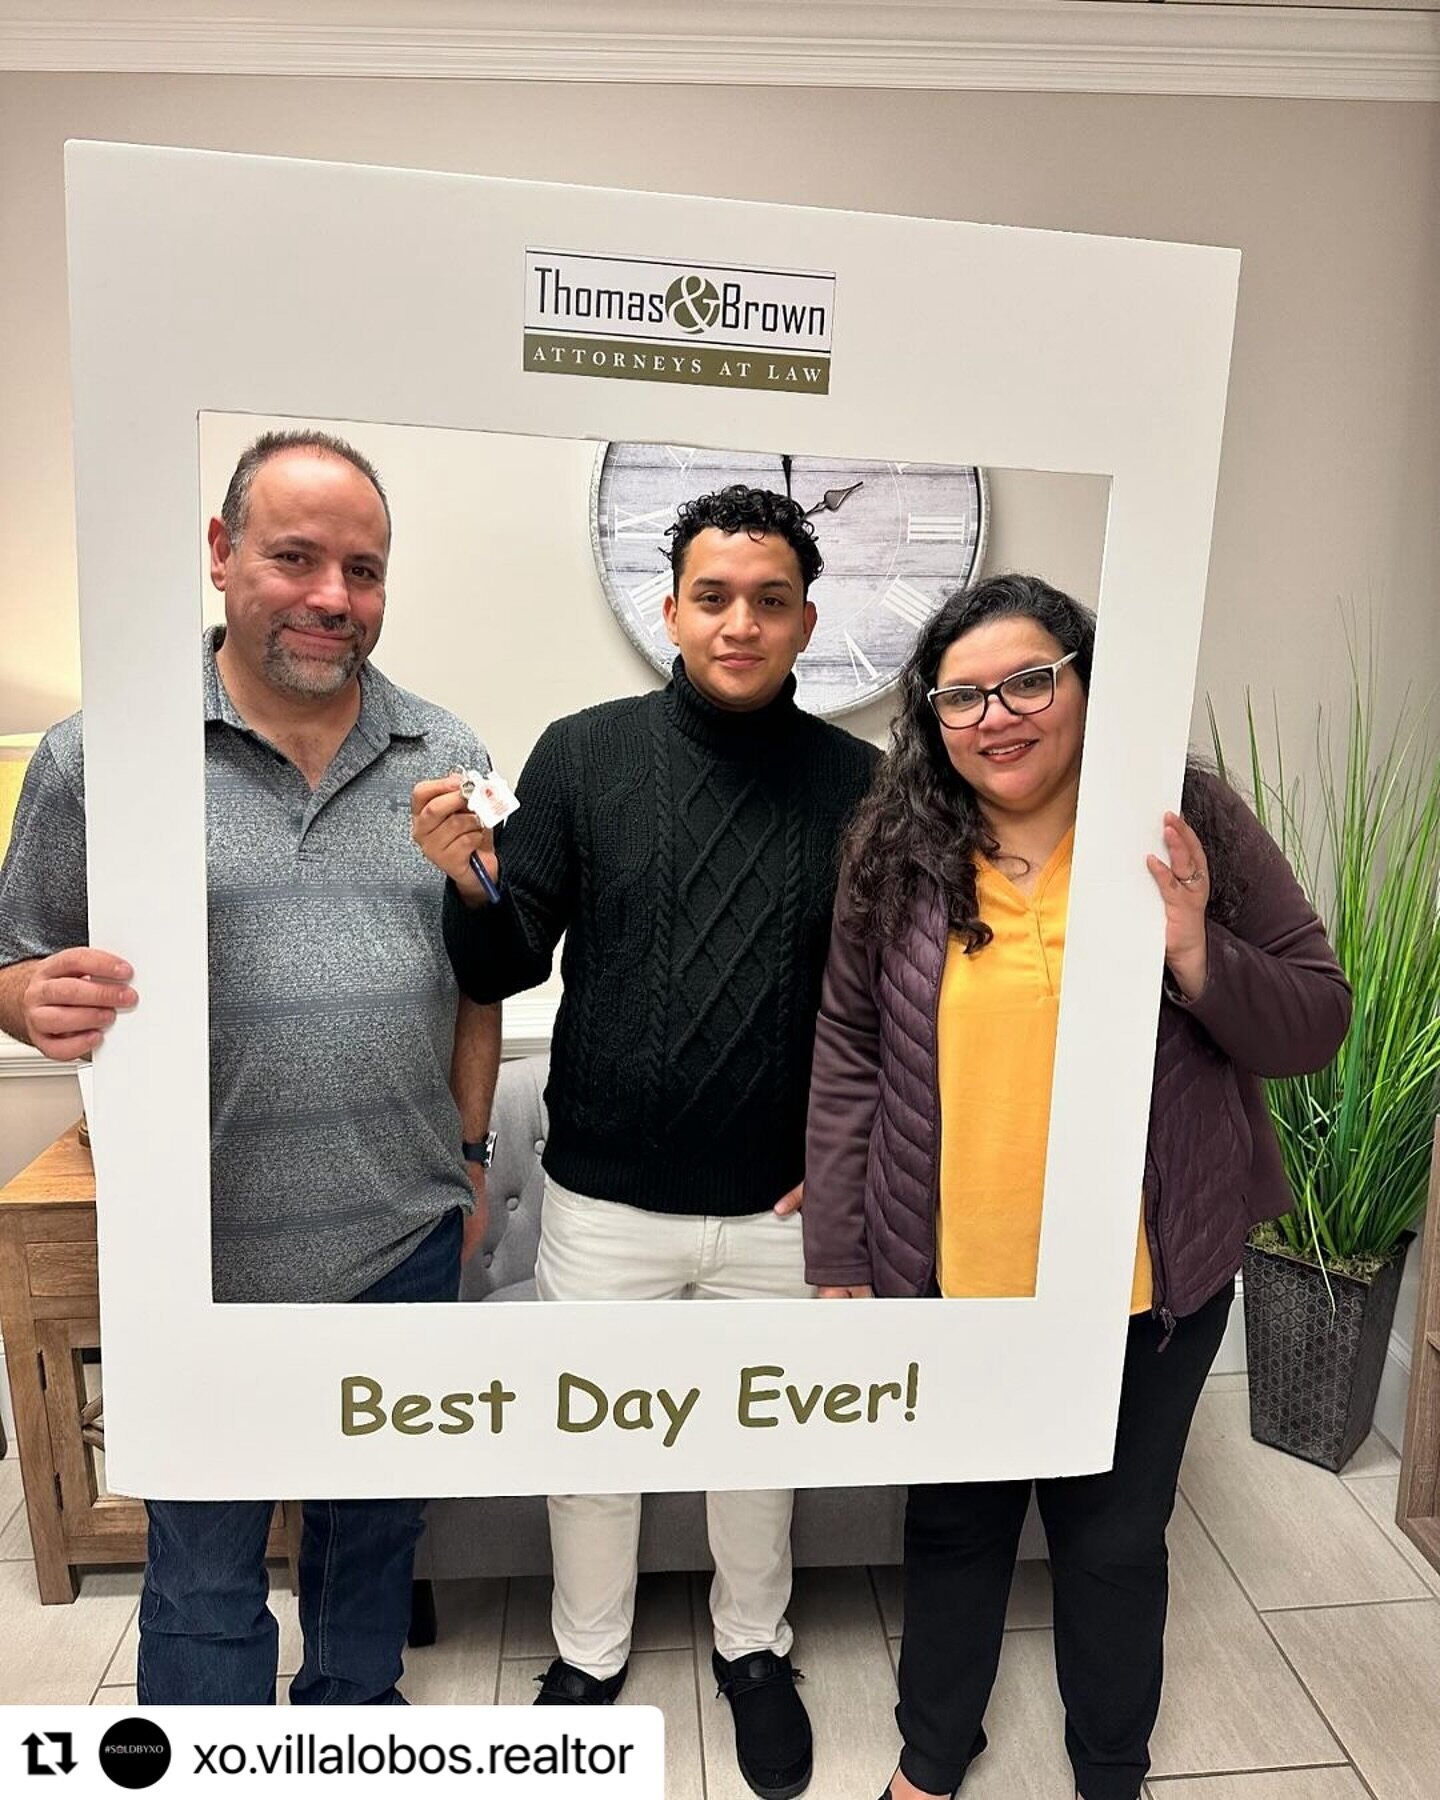 #Repost @xo.villalobos.realtor
・・・
🎉🏡 Congratulations to our amazing first-time home buyers on closing the deal on their new home! 🥳🏠 Not only did they find their dream home, but they&rsquo;ve also already built positive equity on their investmen